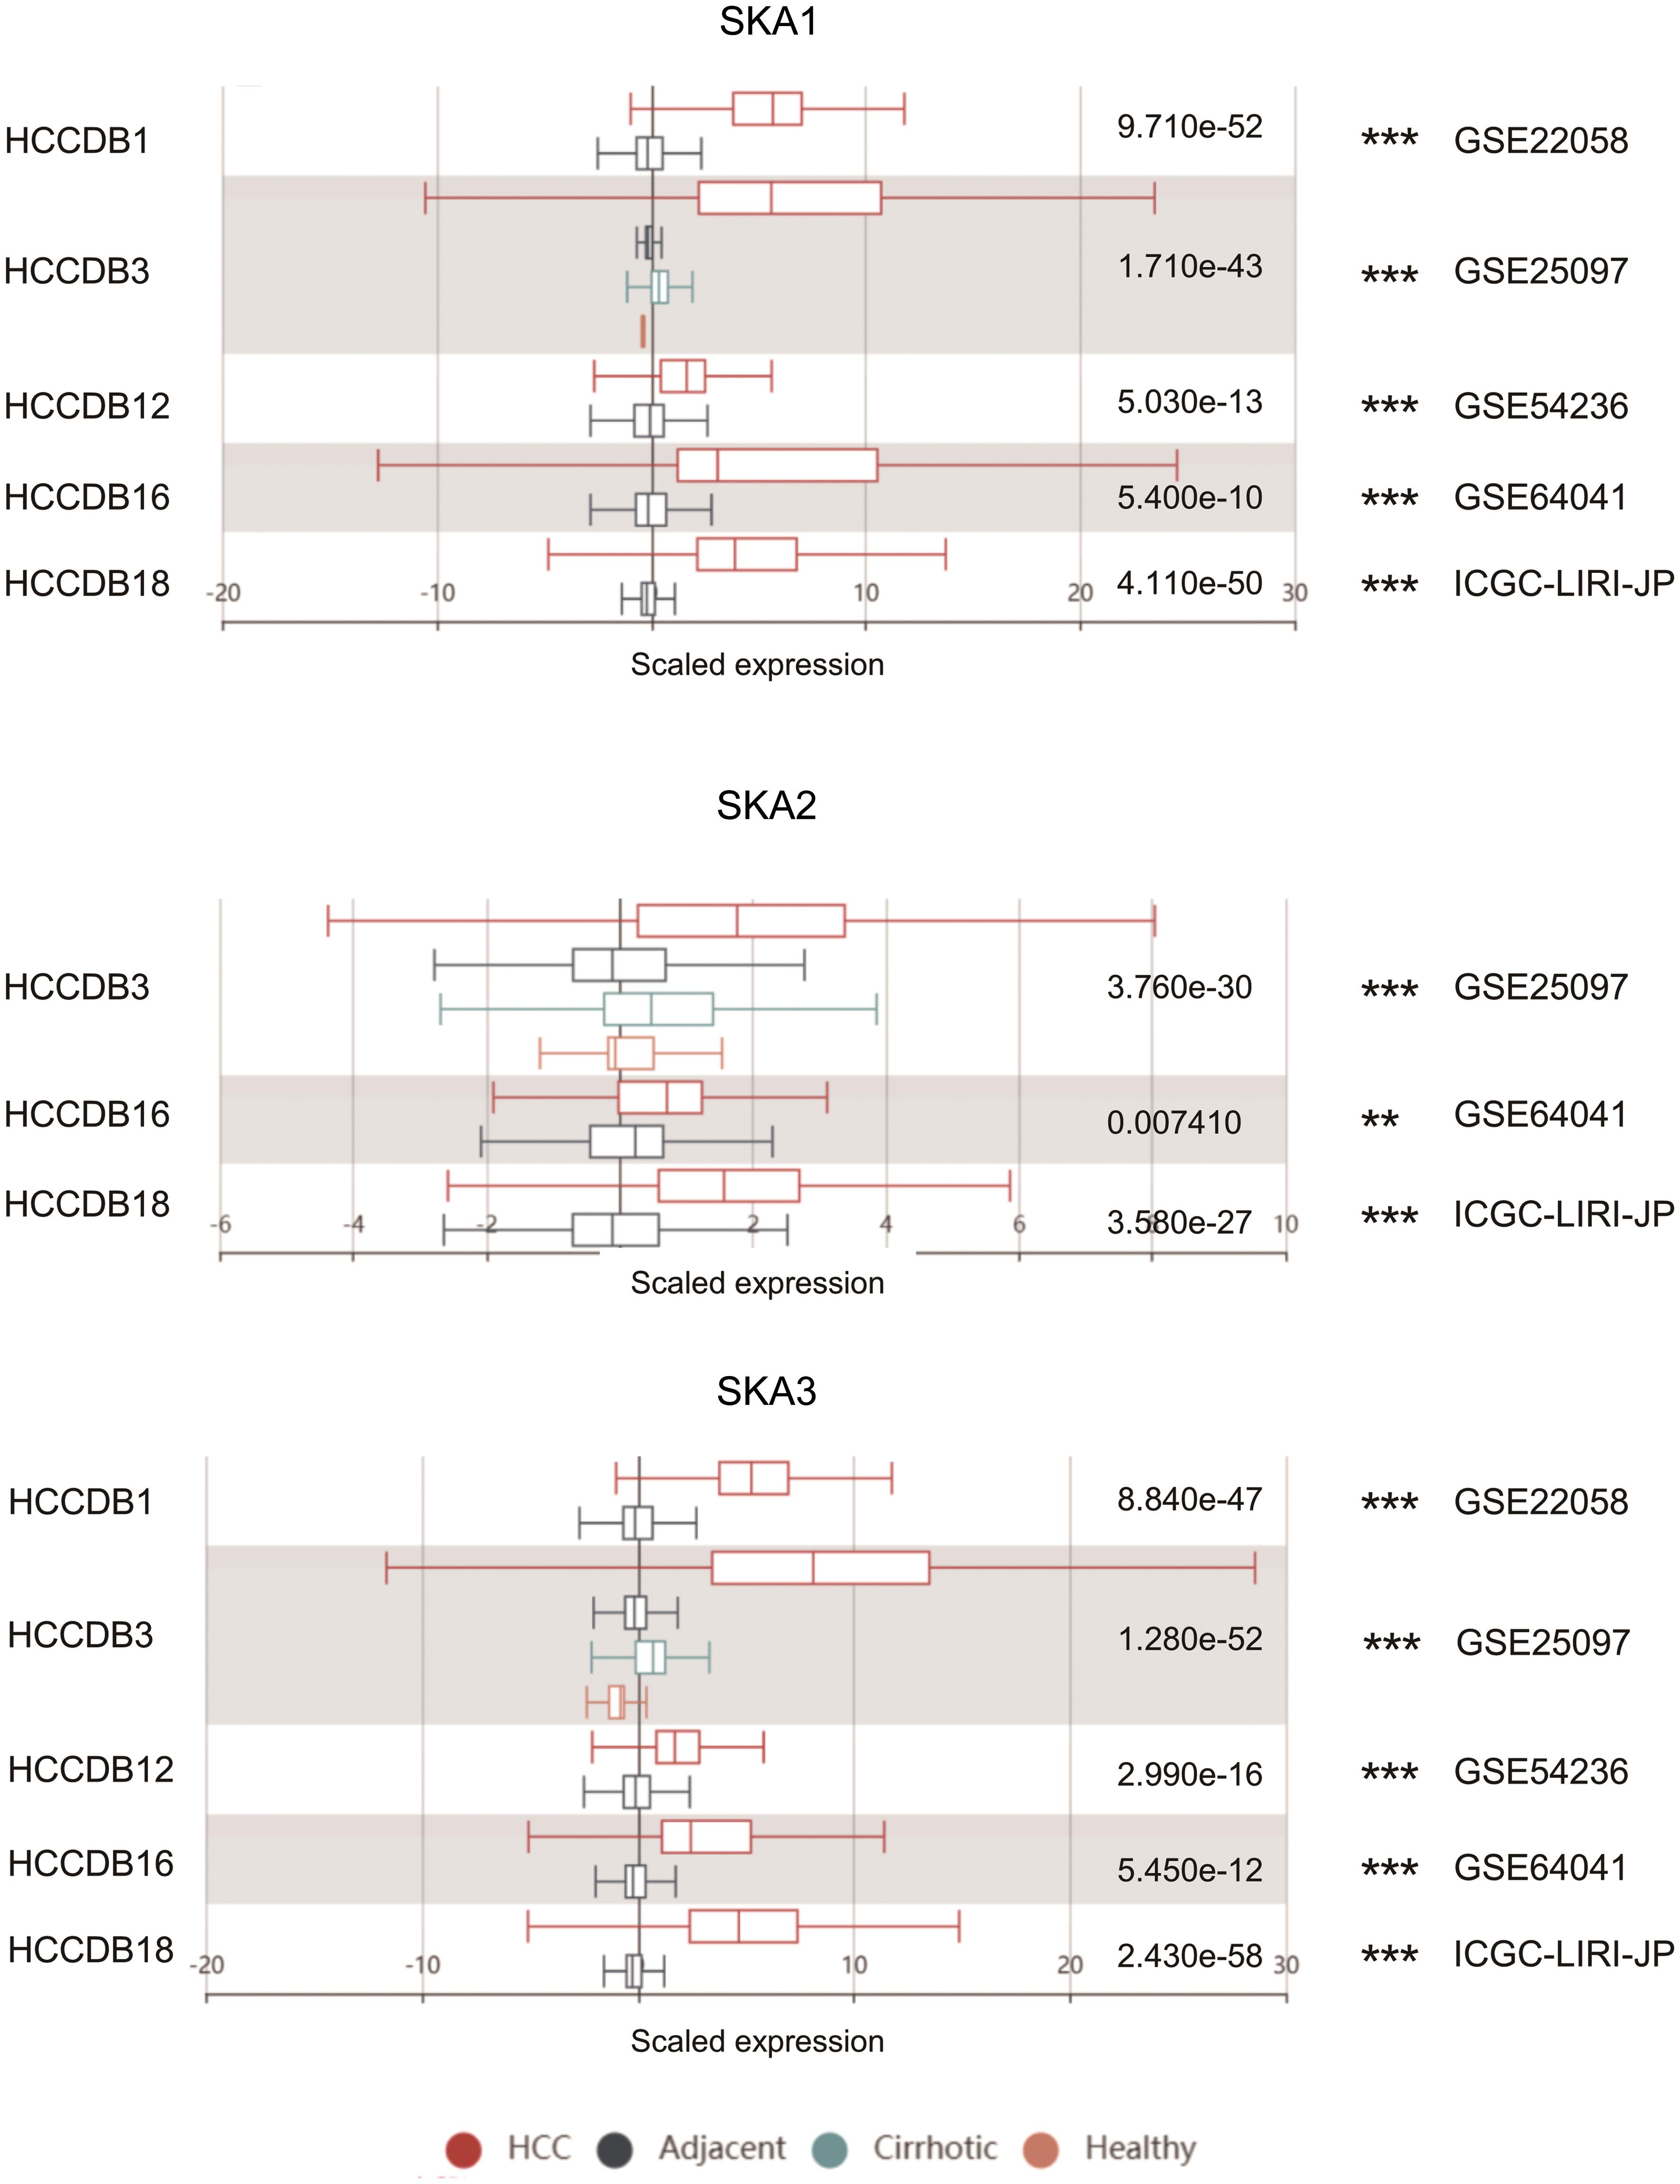 mRNA level of SKA family genes in different GEO and ICGC datasets (HCCDB).